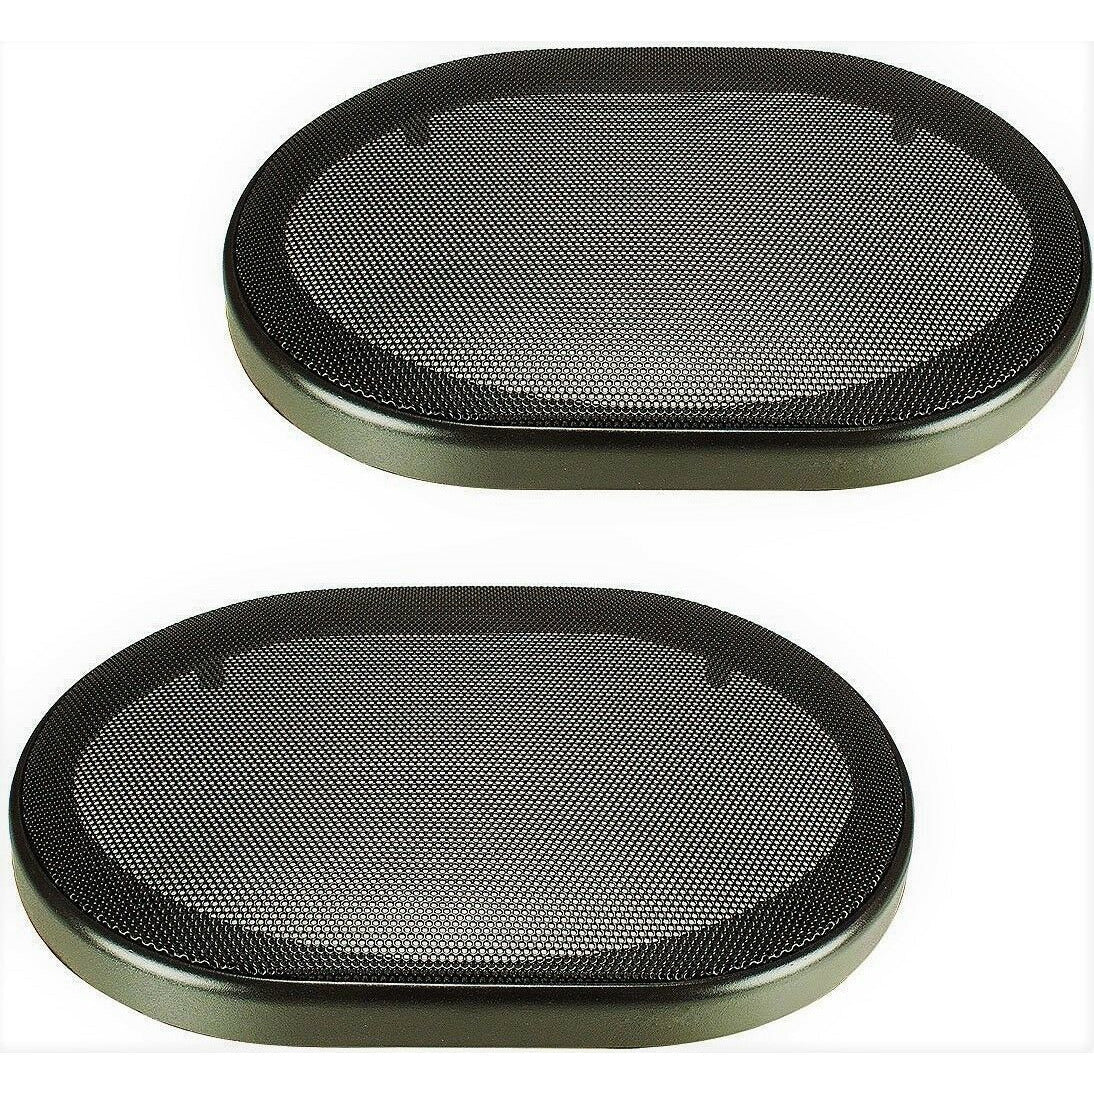 2 Absolute CS6x9 Universal 6x9" Car Speaker Coaxial Component Protective Grills Covers